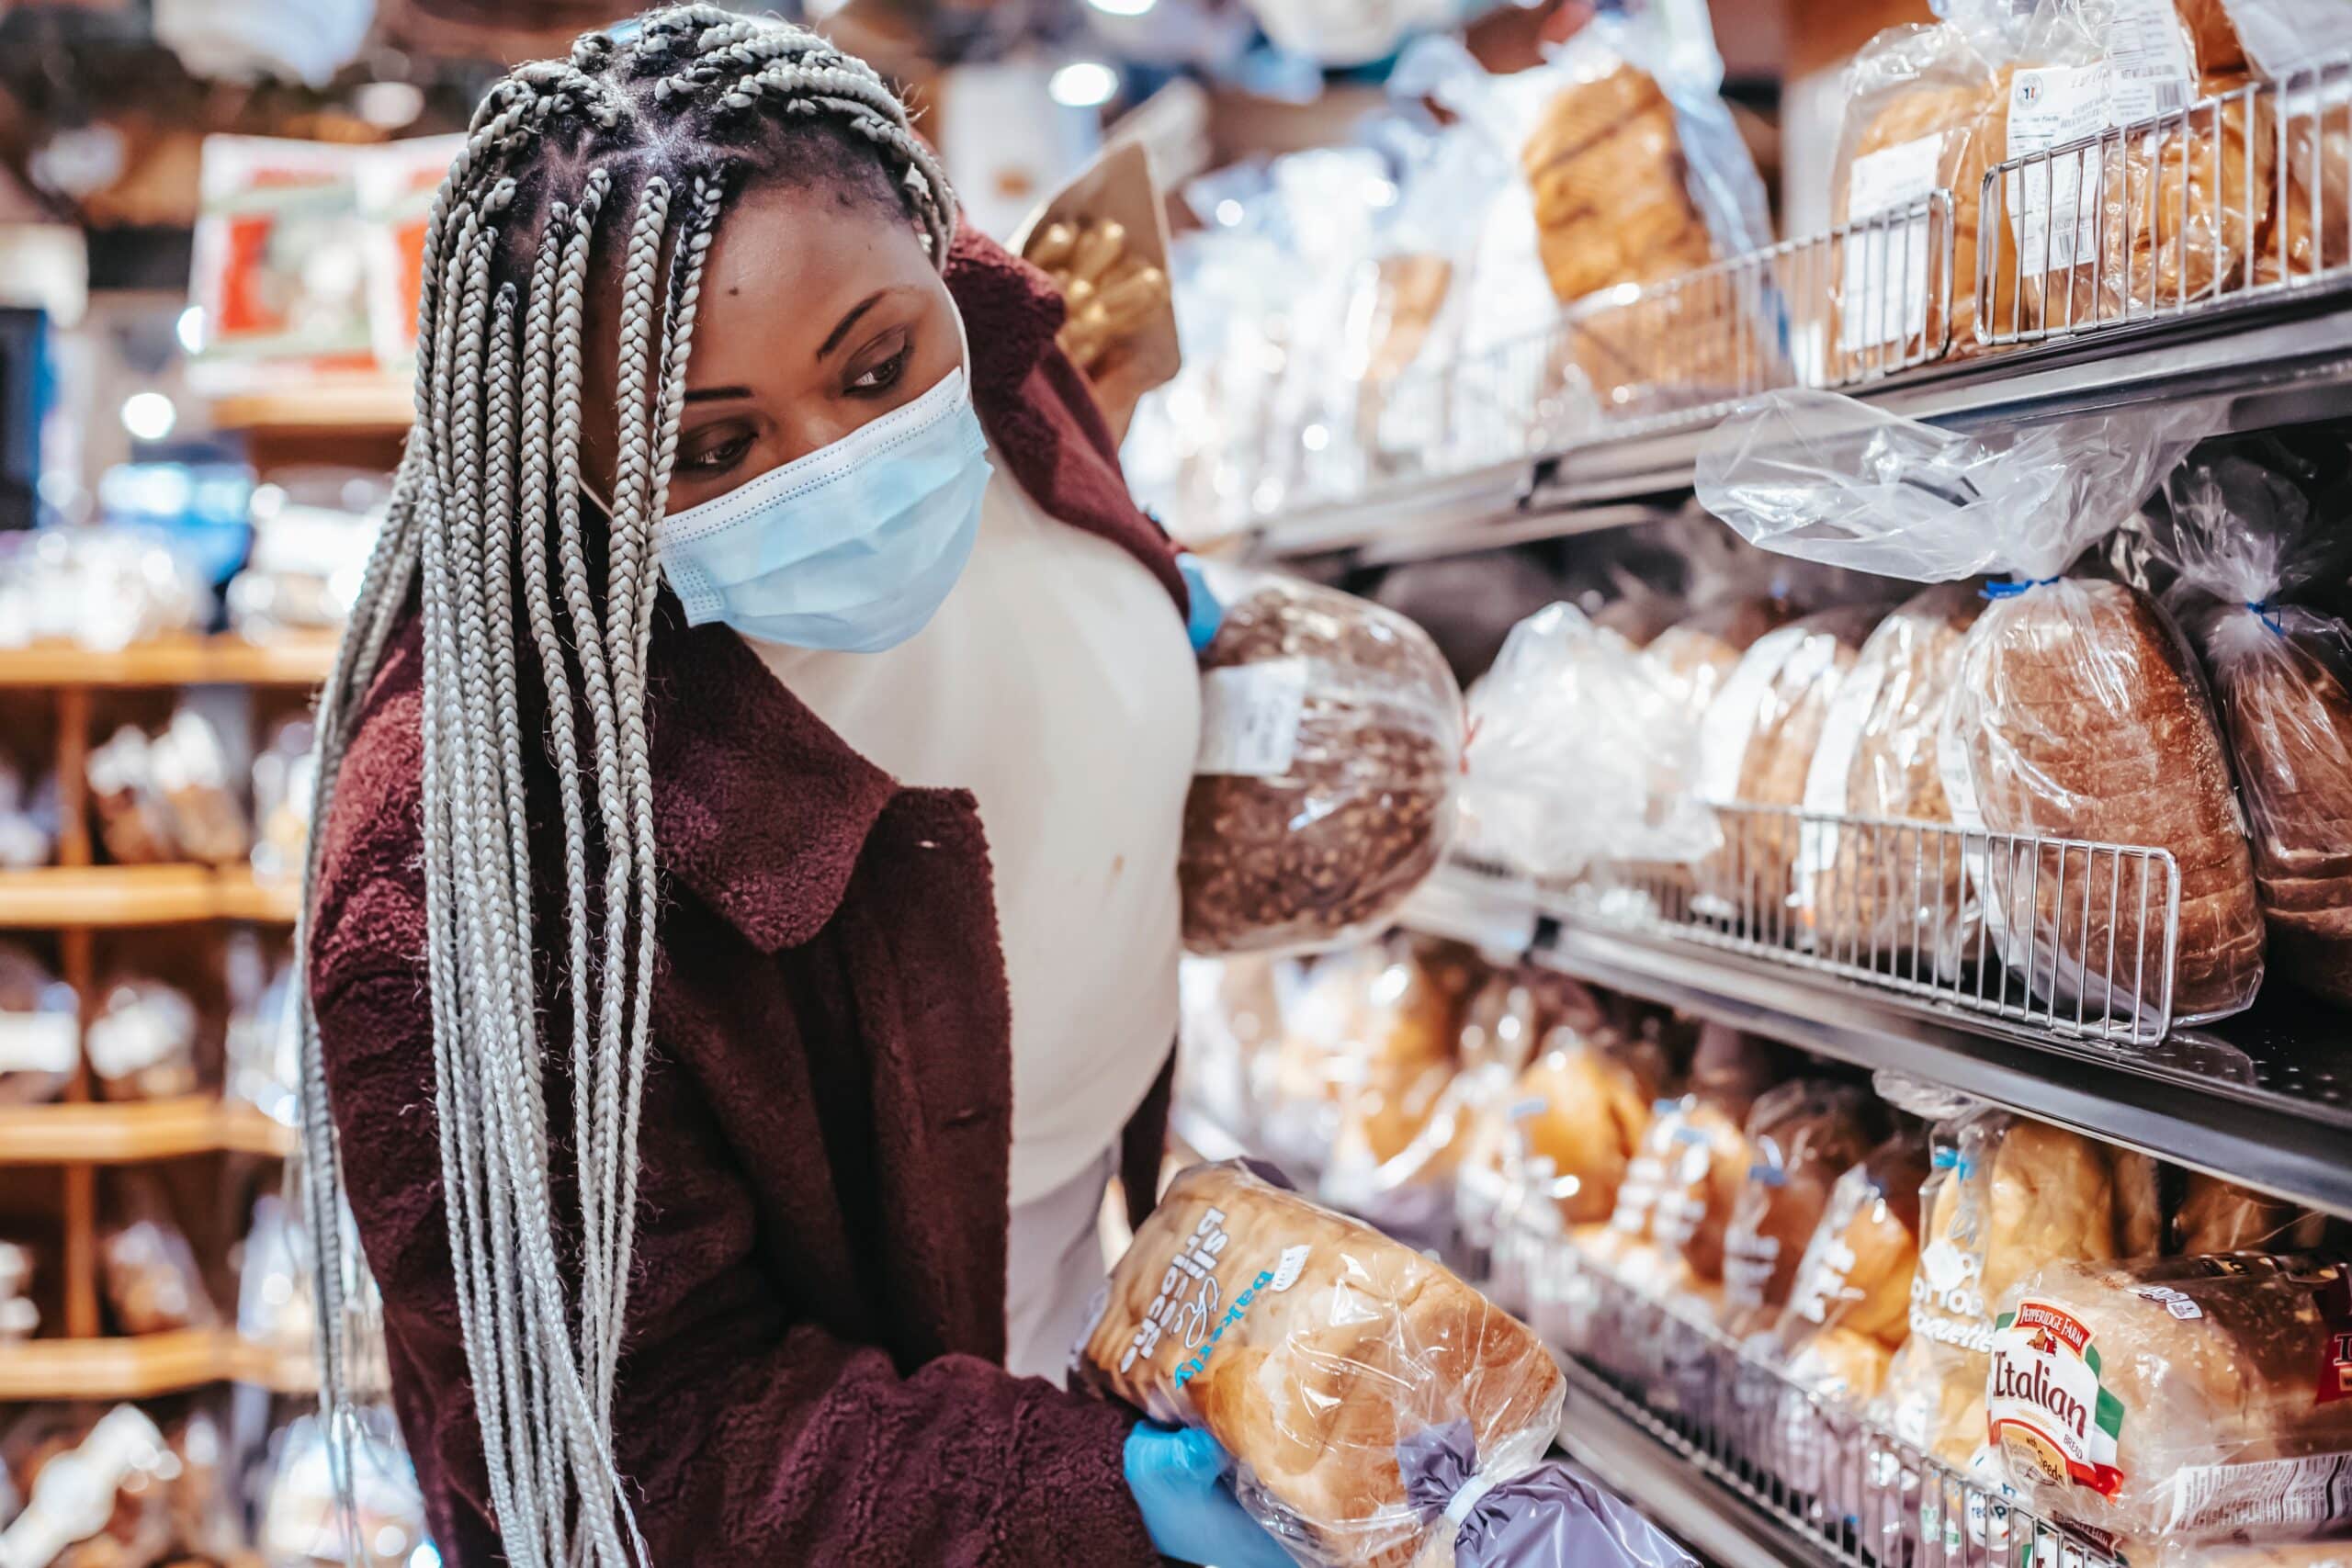 Sourdough bread can be found in many grocery stores and health food markets